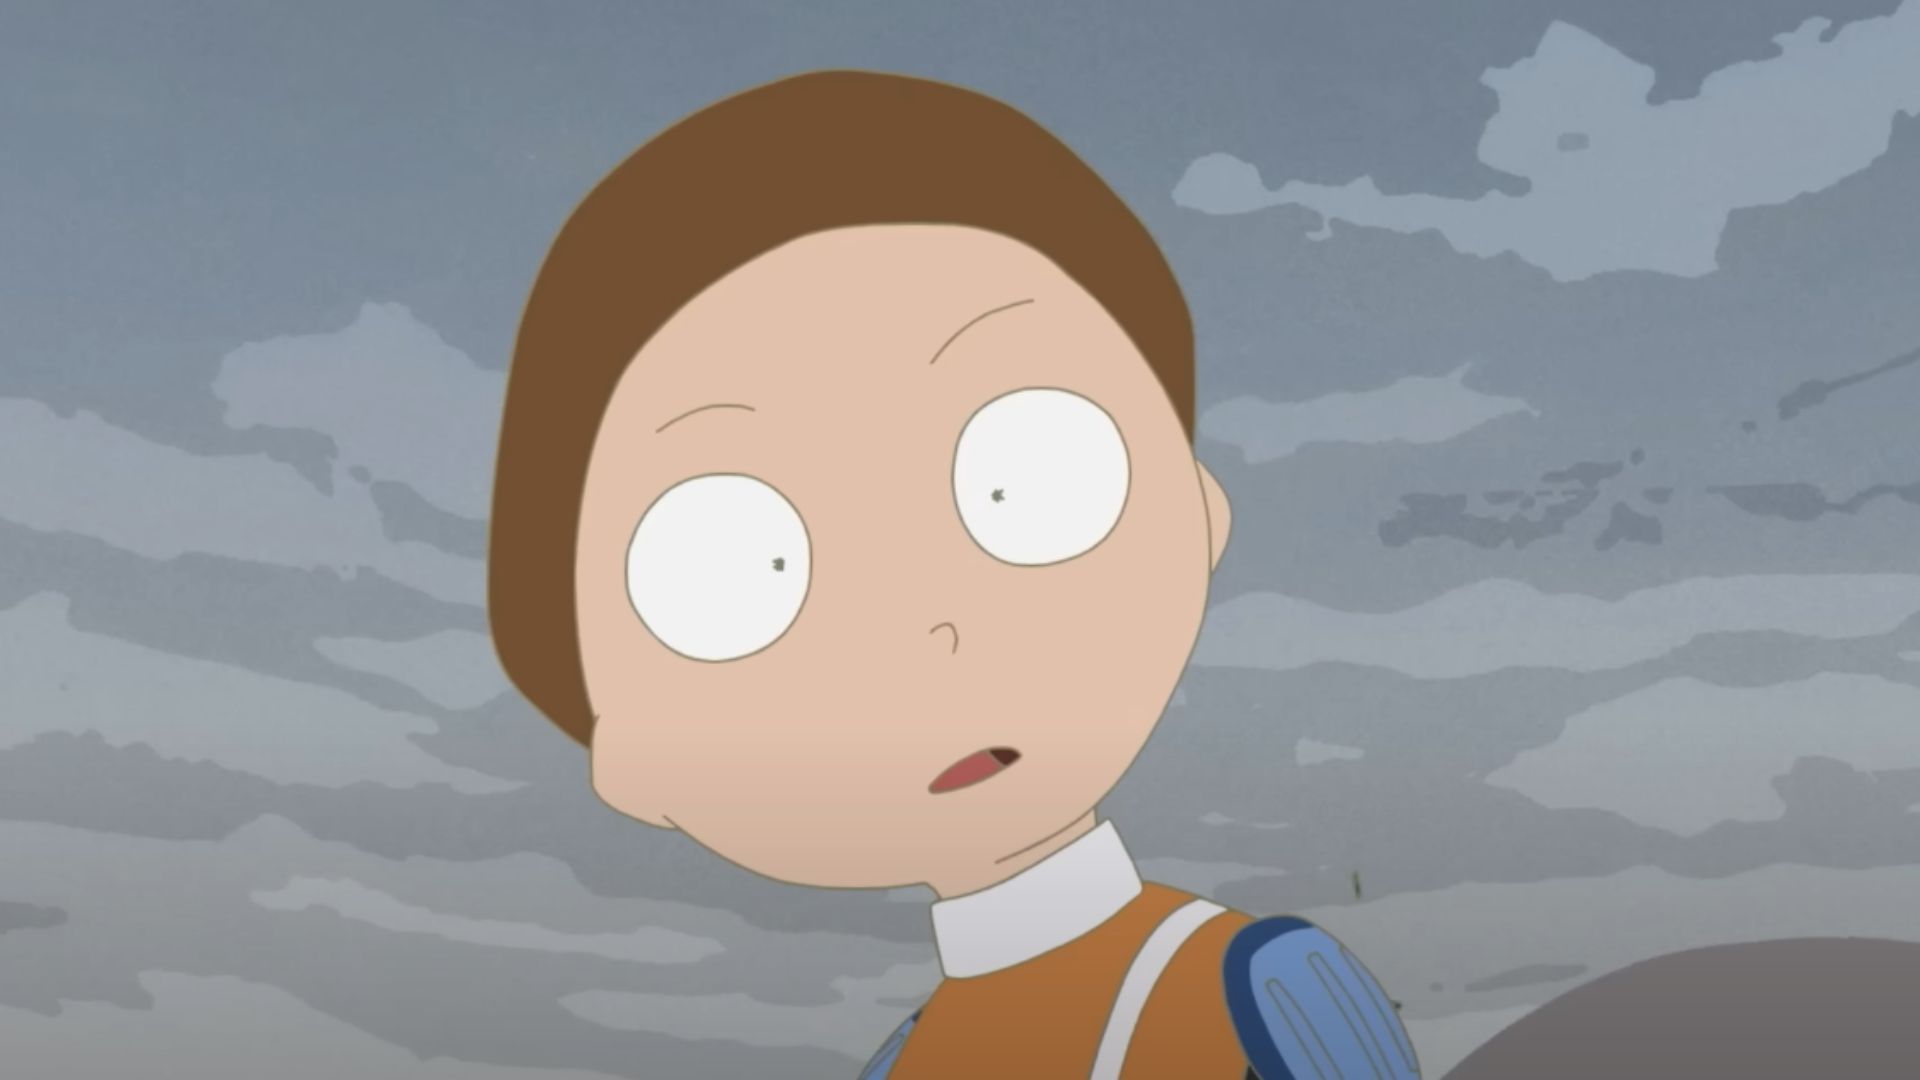 Morty in Rick and Morty The Anime